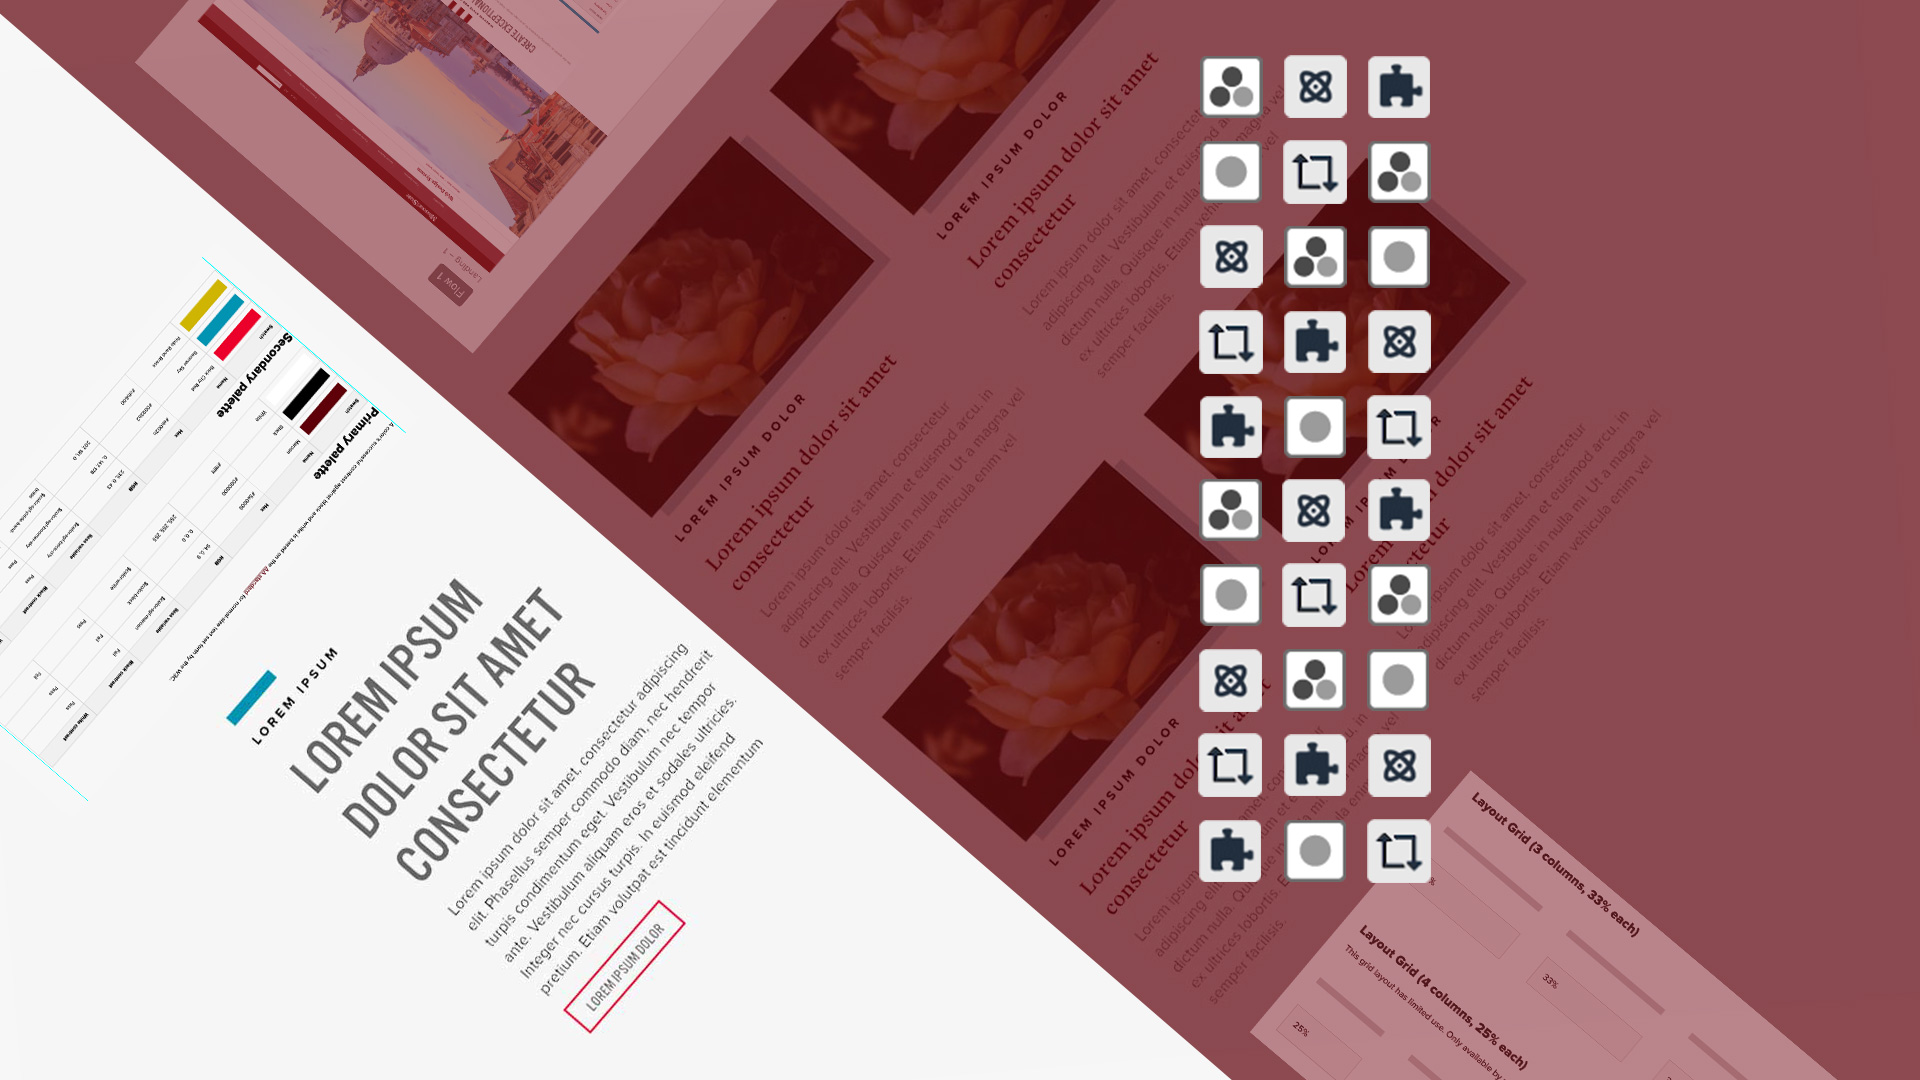 Missouri State Web Design System illustrated with components, patterns and branding elements